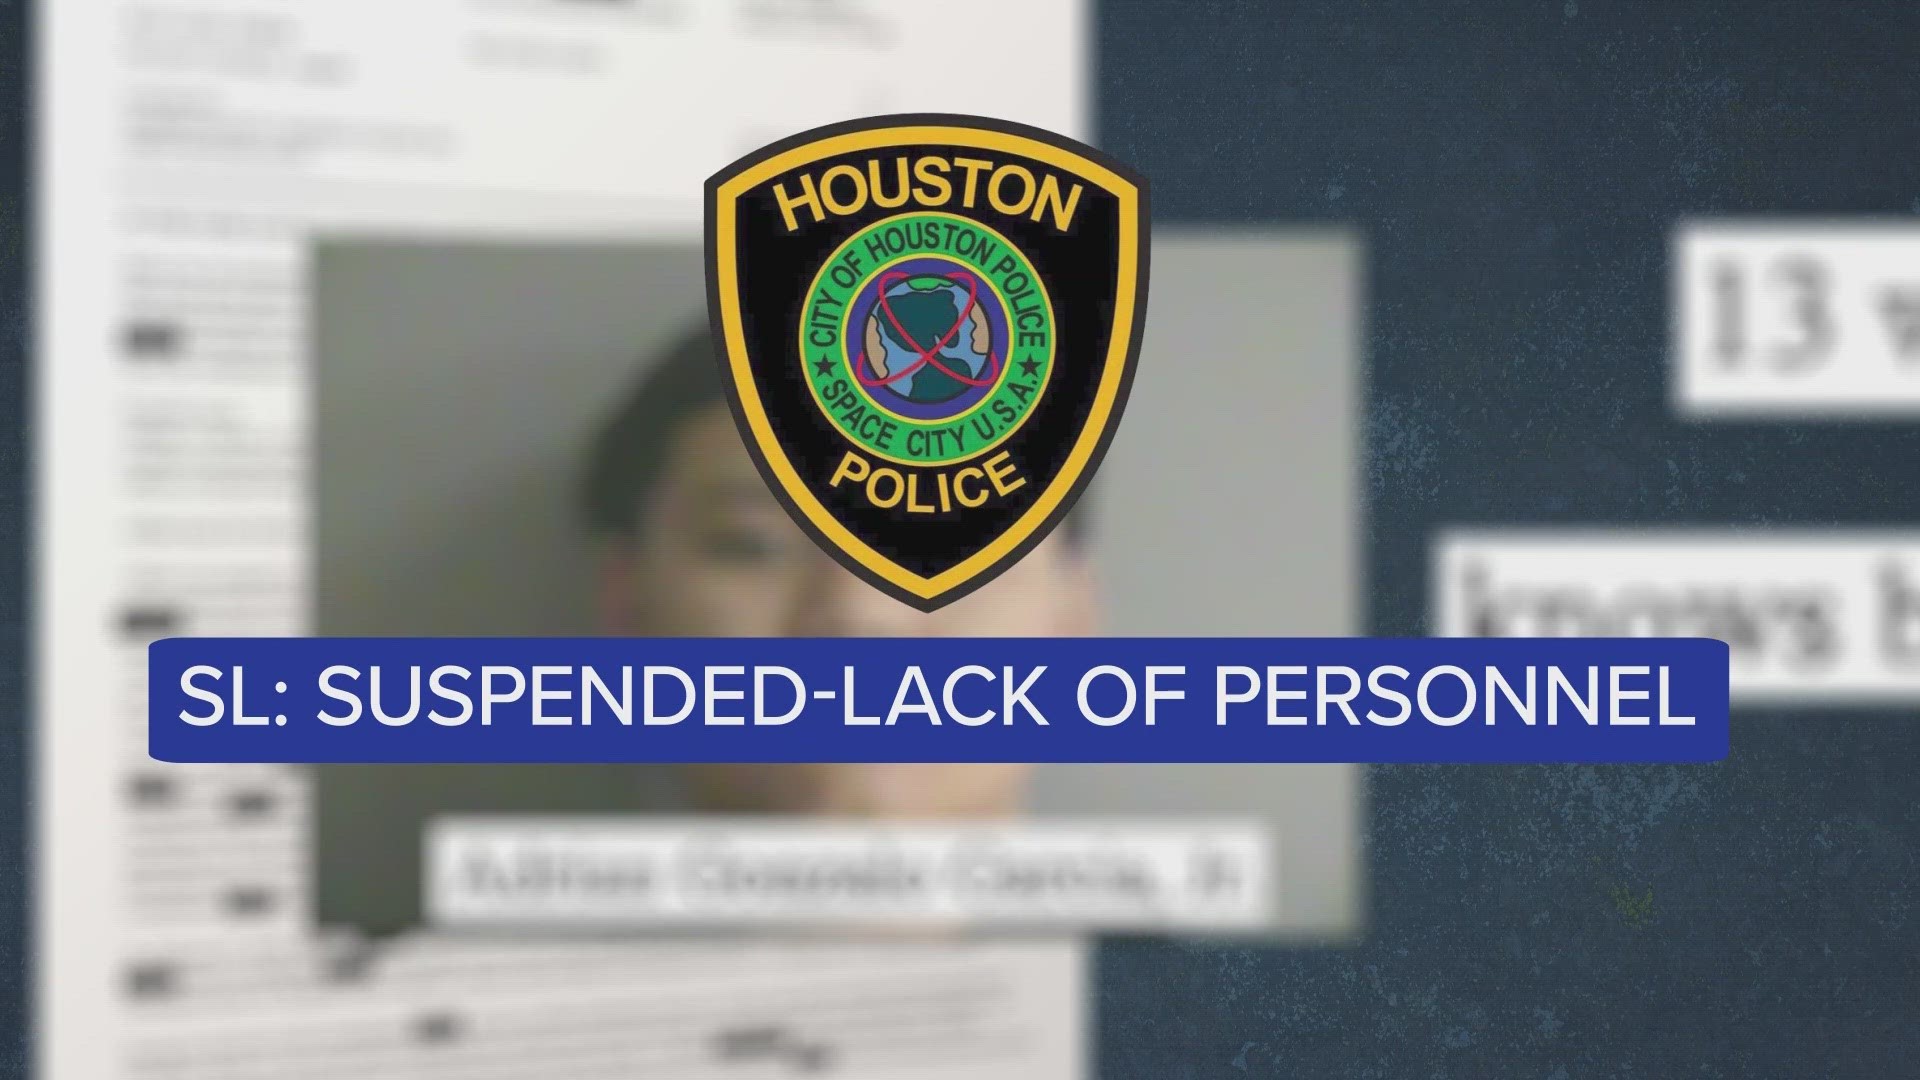 According to data collected by KHOU 11 Investigates, the vast majority of the suspended cases that resulted in charges had solid, workable leads from the beginning.